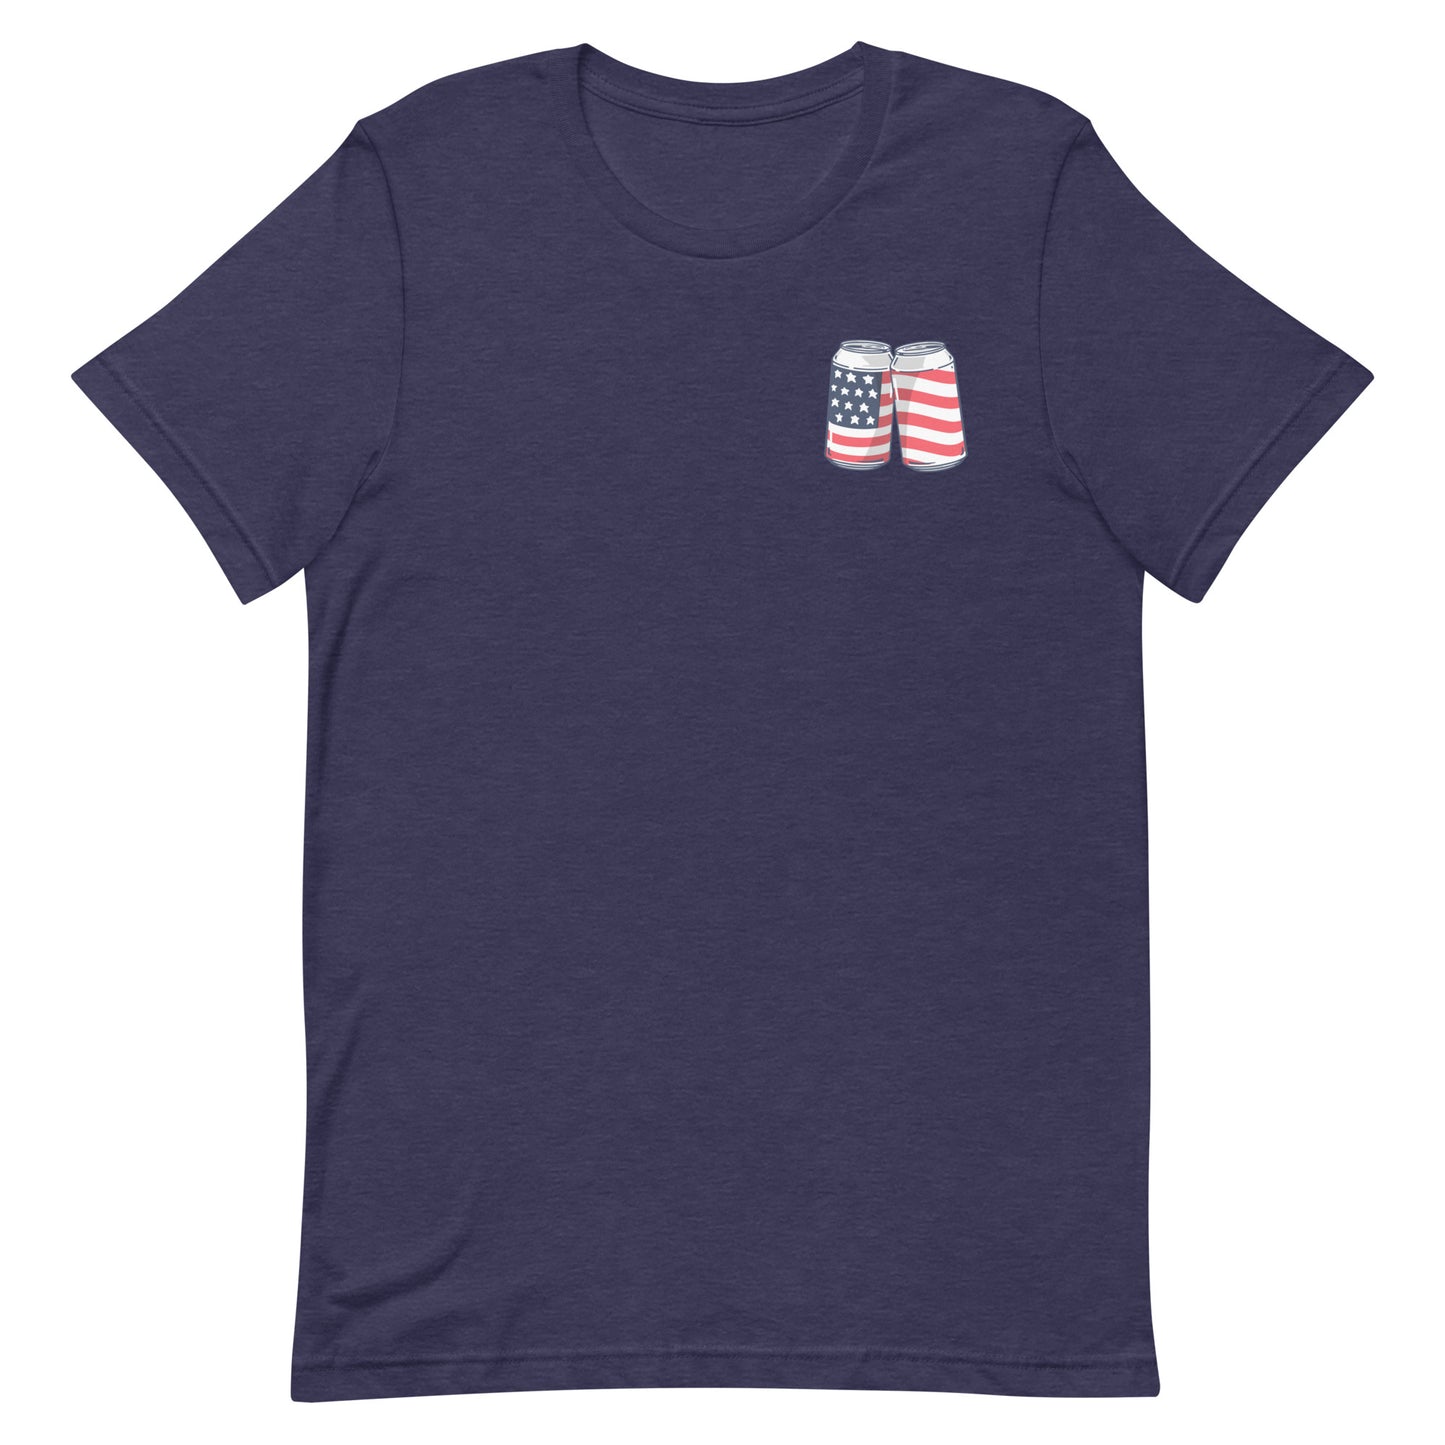 Red, White & Brew Tee